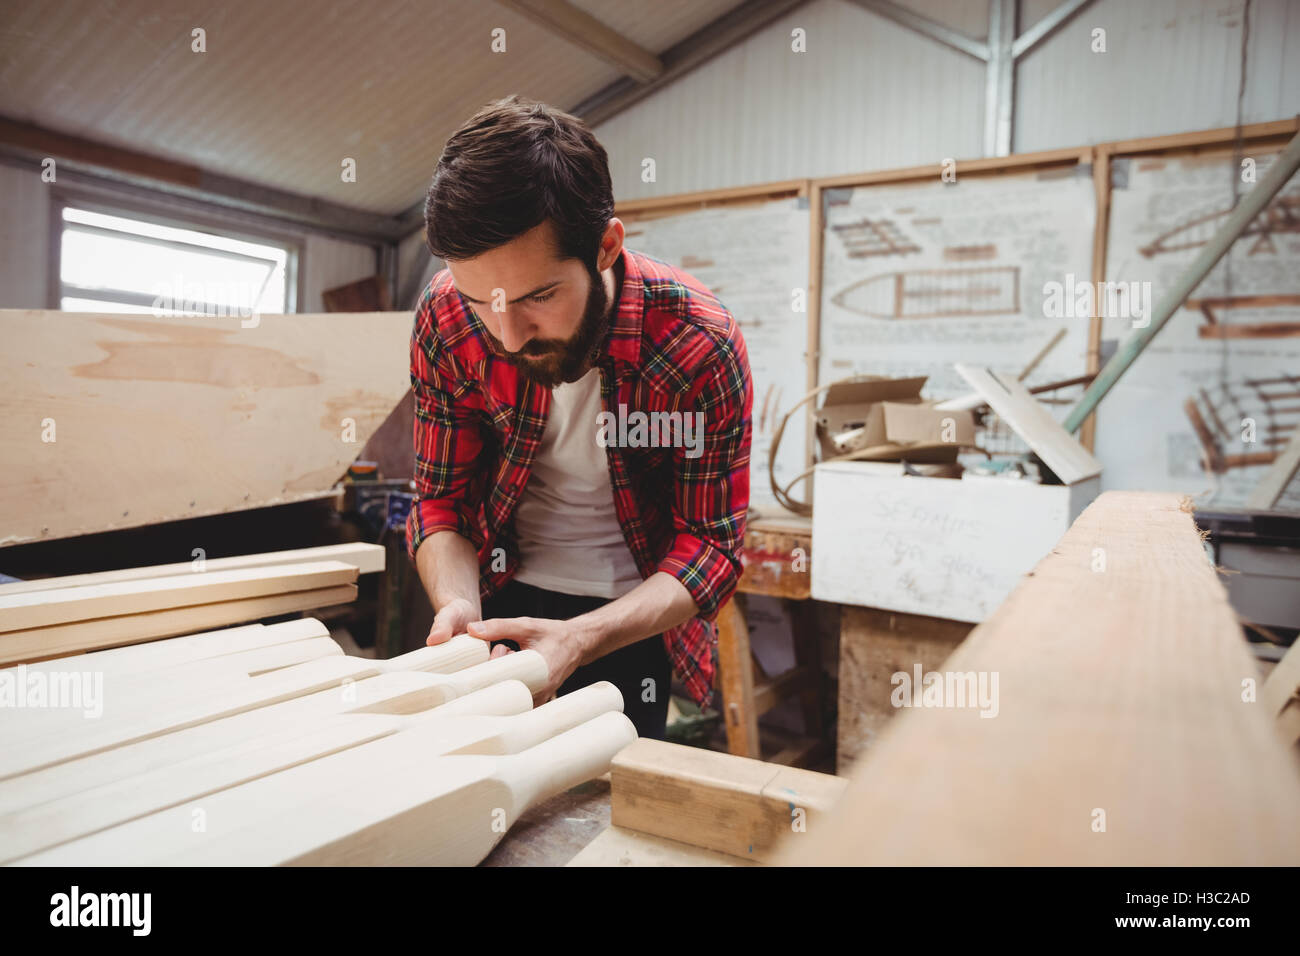 Man working on wooden plank Stock Photo - Alamy